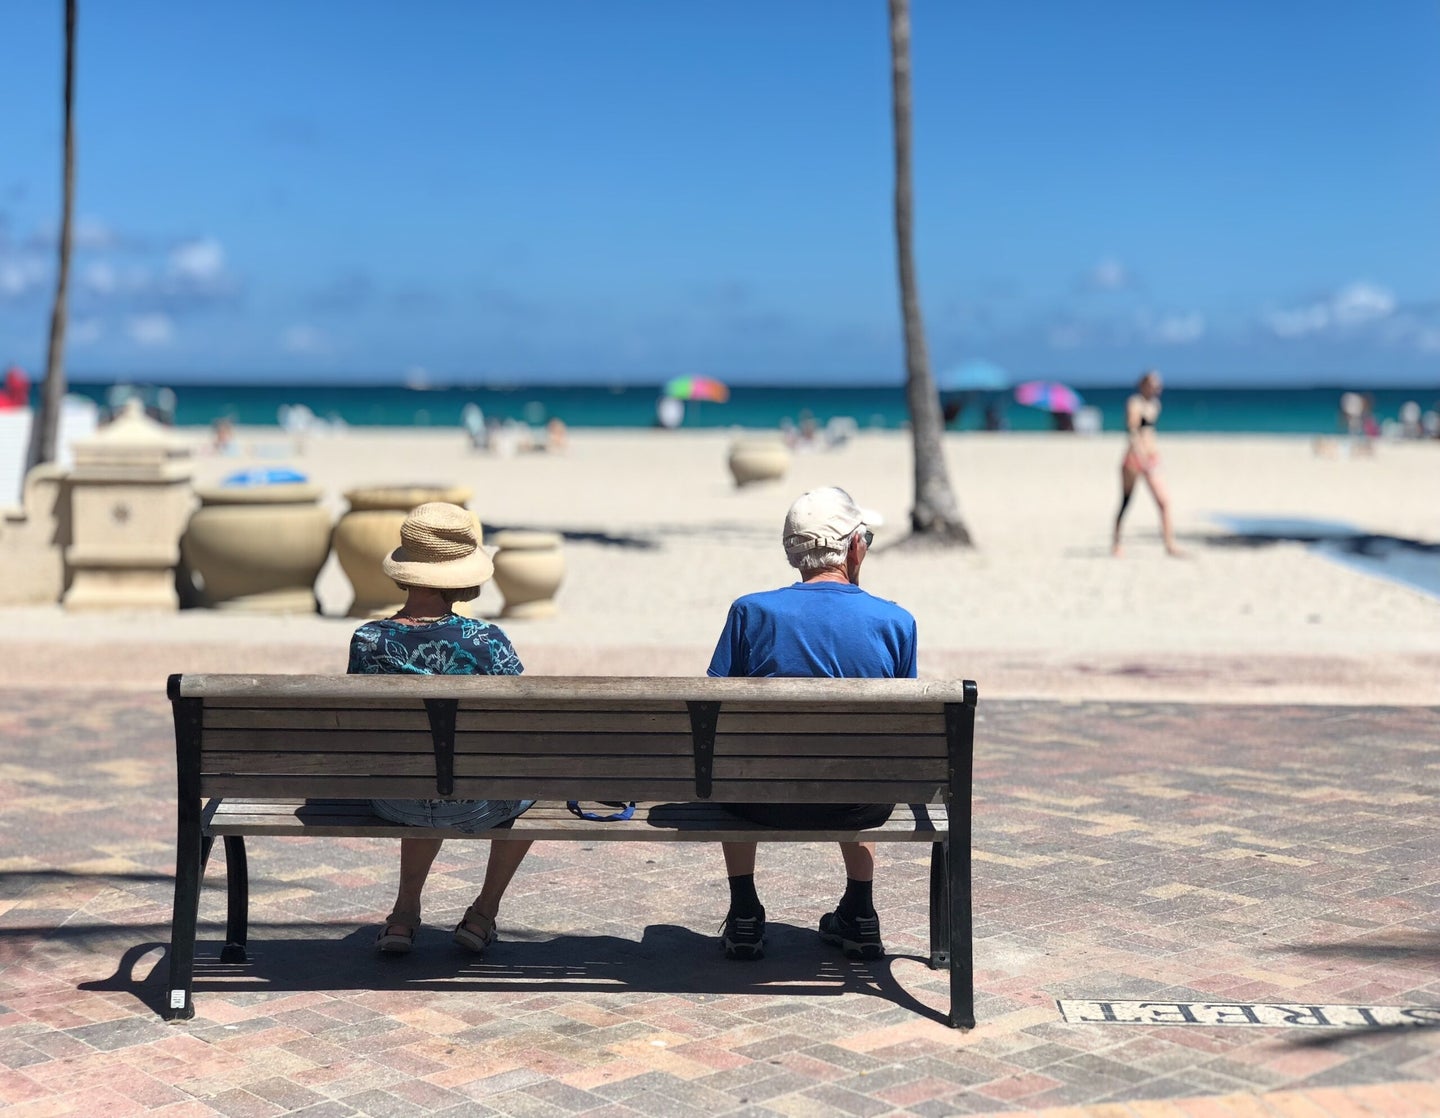 Older couple sitting on bench in Miami.